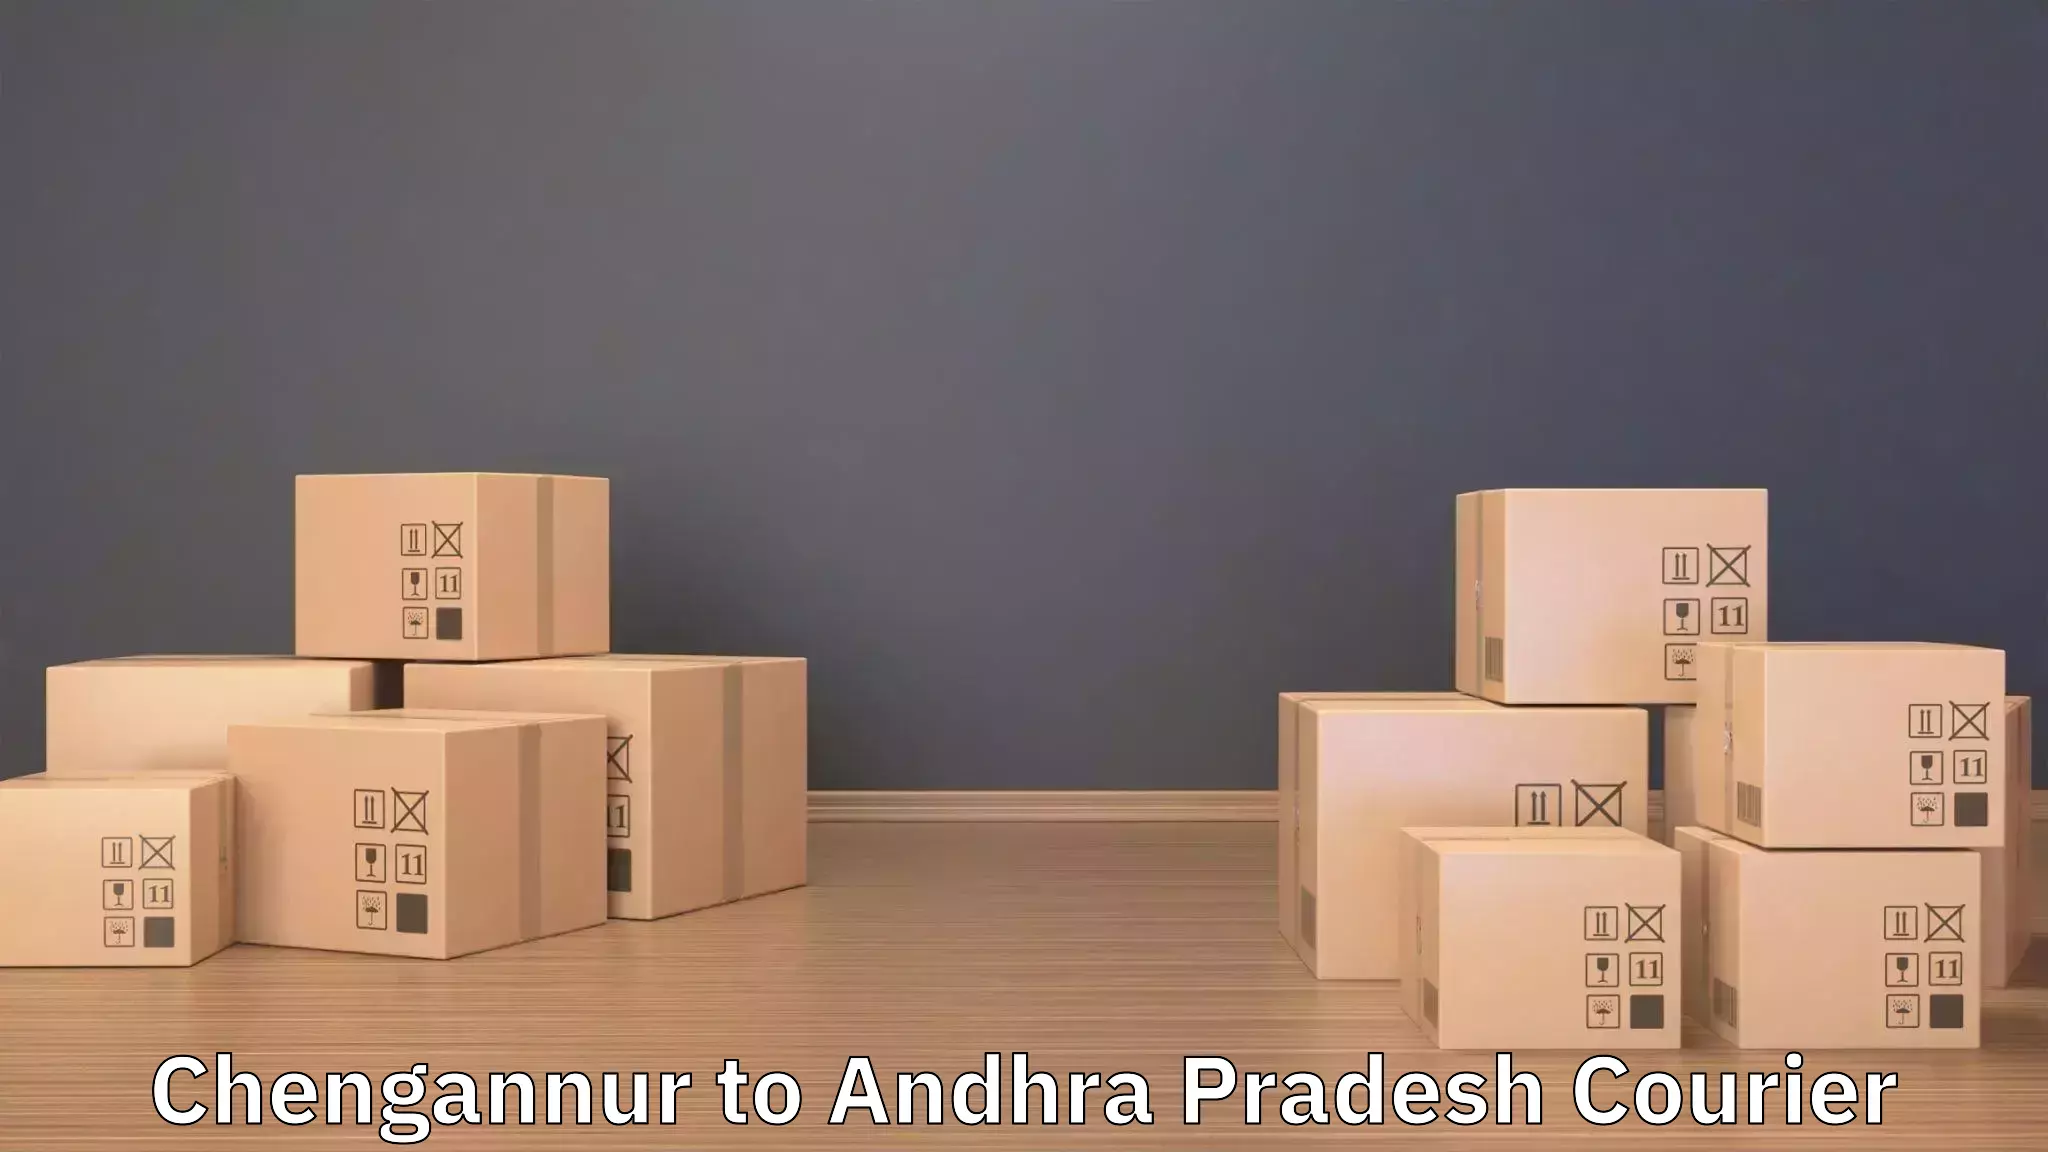 Efficient moving company in Chengannur to Tirupati